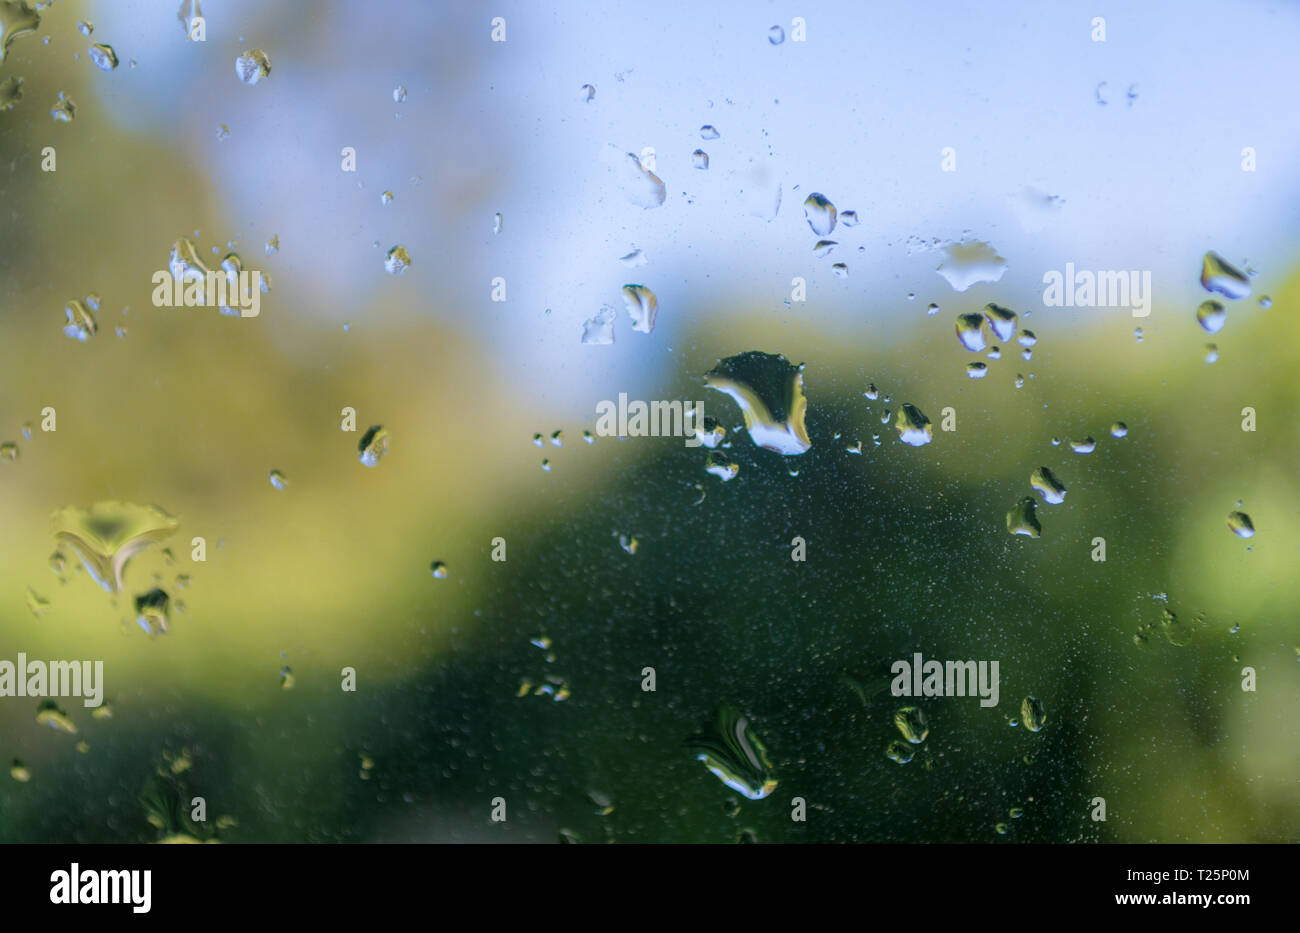 view of green garden behind a glass wet from the rain Stock Photo